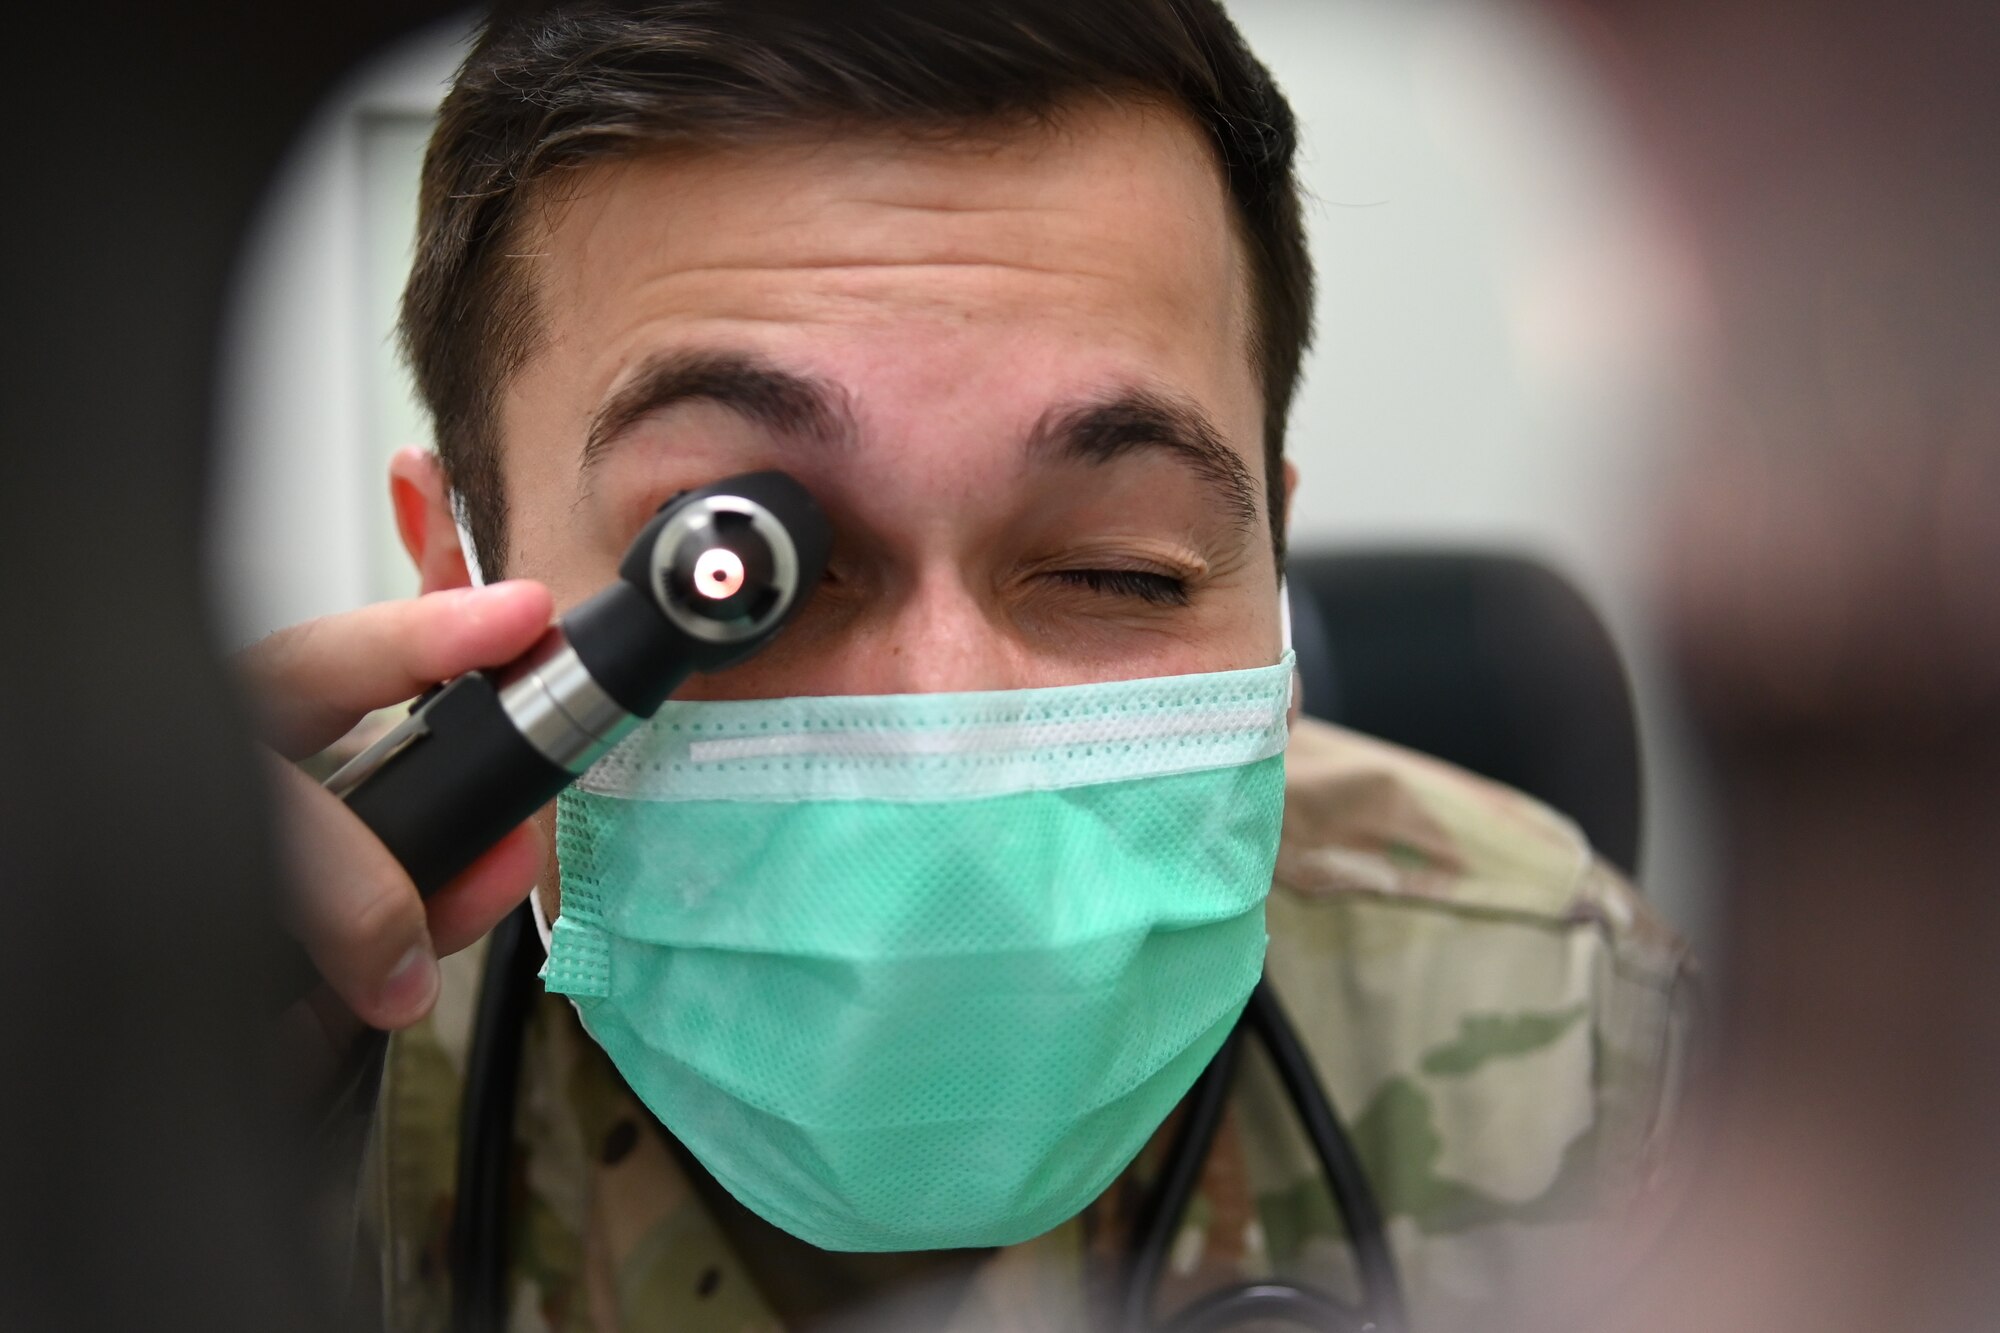 Staff Sgt. Jon Paul Fitzgerald, 336th Fighter Squadron independent duty medical technician, uses an otoscope at Seymour Johnson Air Force Base, North Carolina, July 13, 2021. An otoscope is used to inspect a patient’s outer ear canal and eardrum. (U.S. Air Force Photo by Airman 1st Class David Lynn)